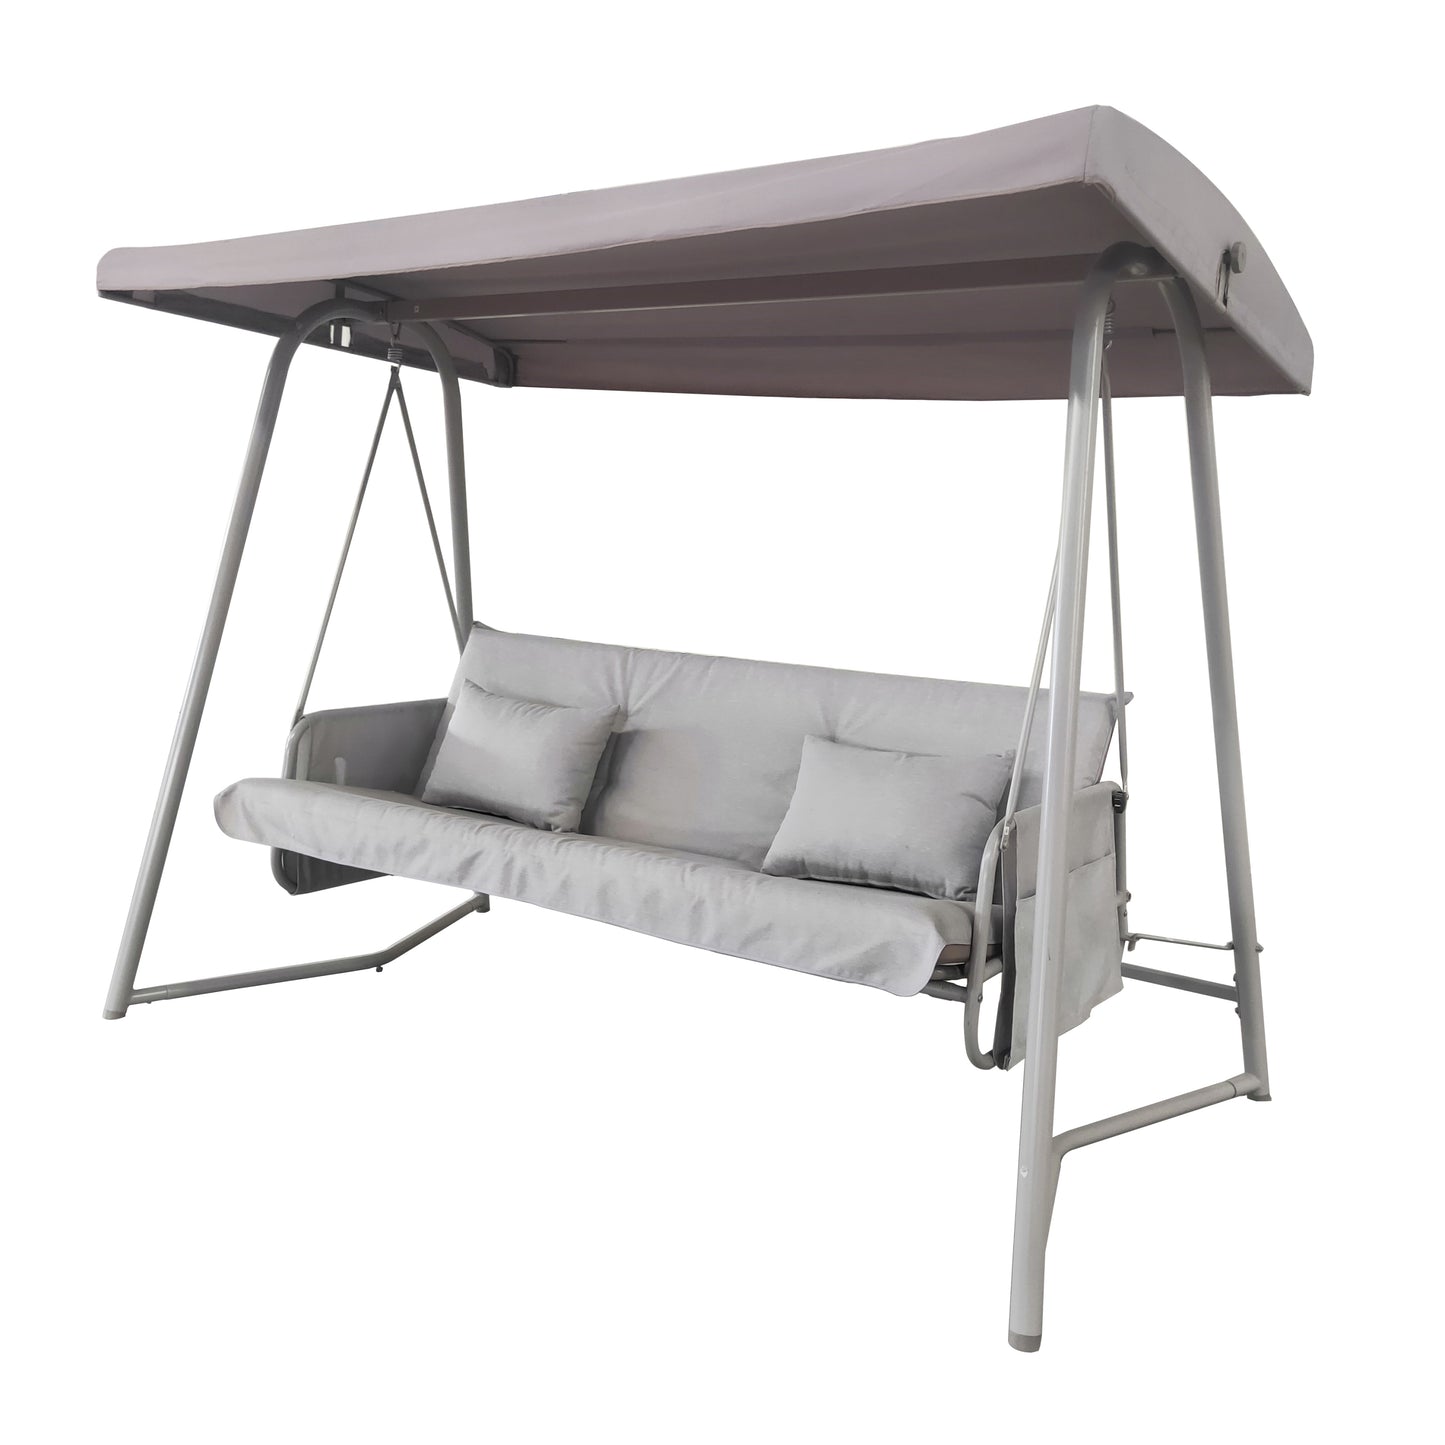 Outdoor Patio 3seater Metal Swing Chair Swing bed with Cushion and Adjustable Canopy Champagne Color (Old SKU:W40018715)